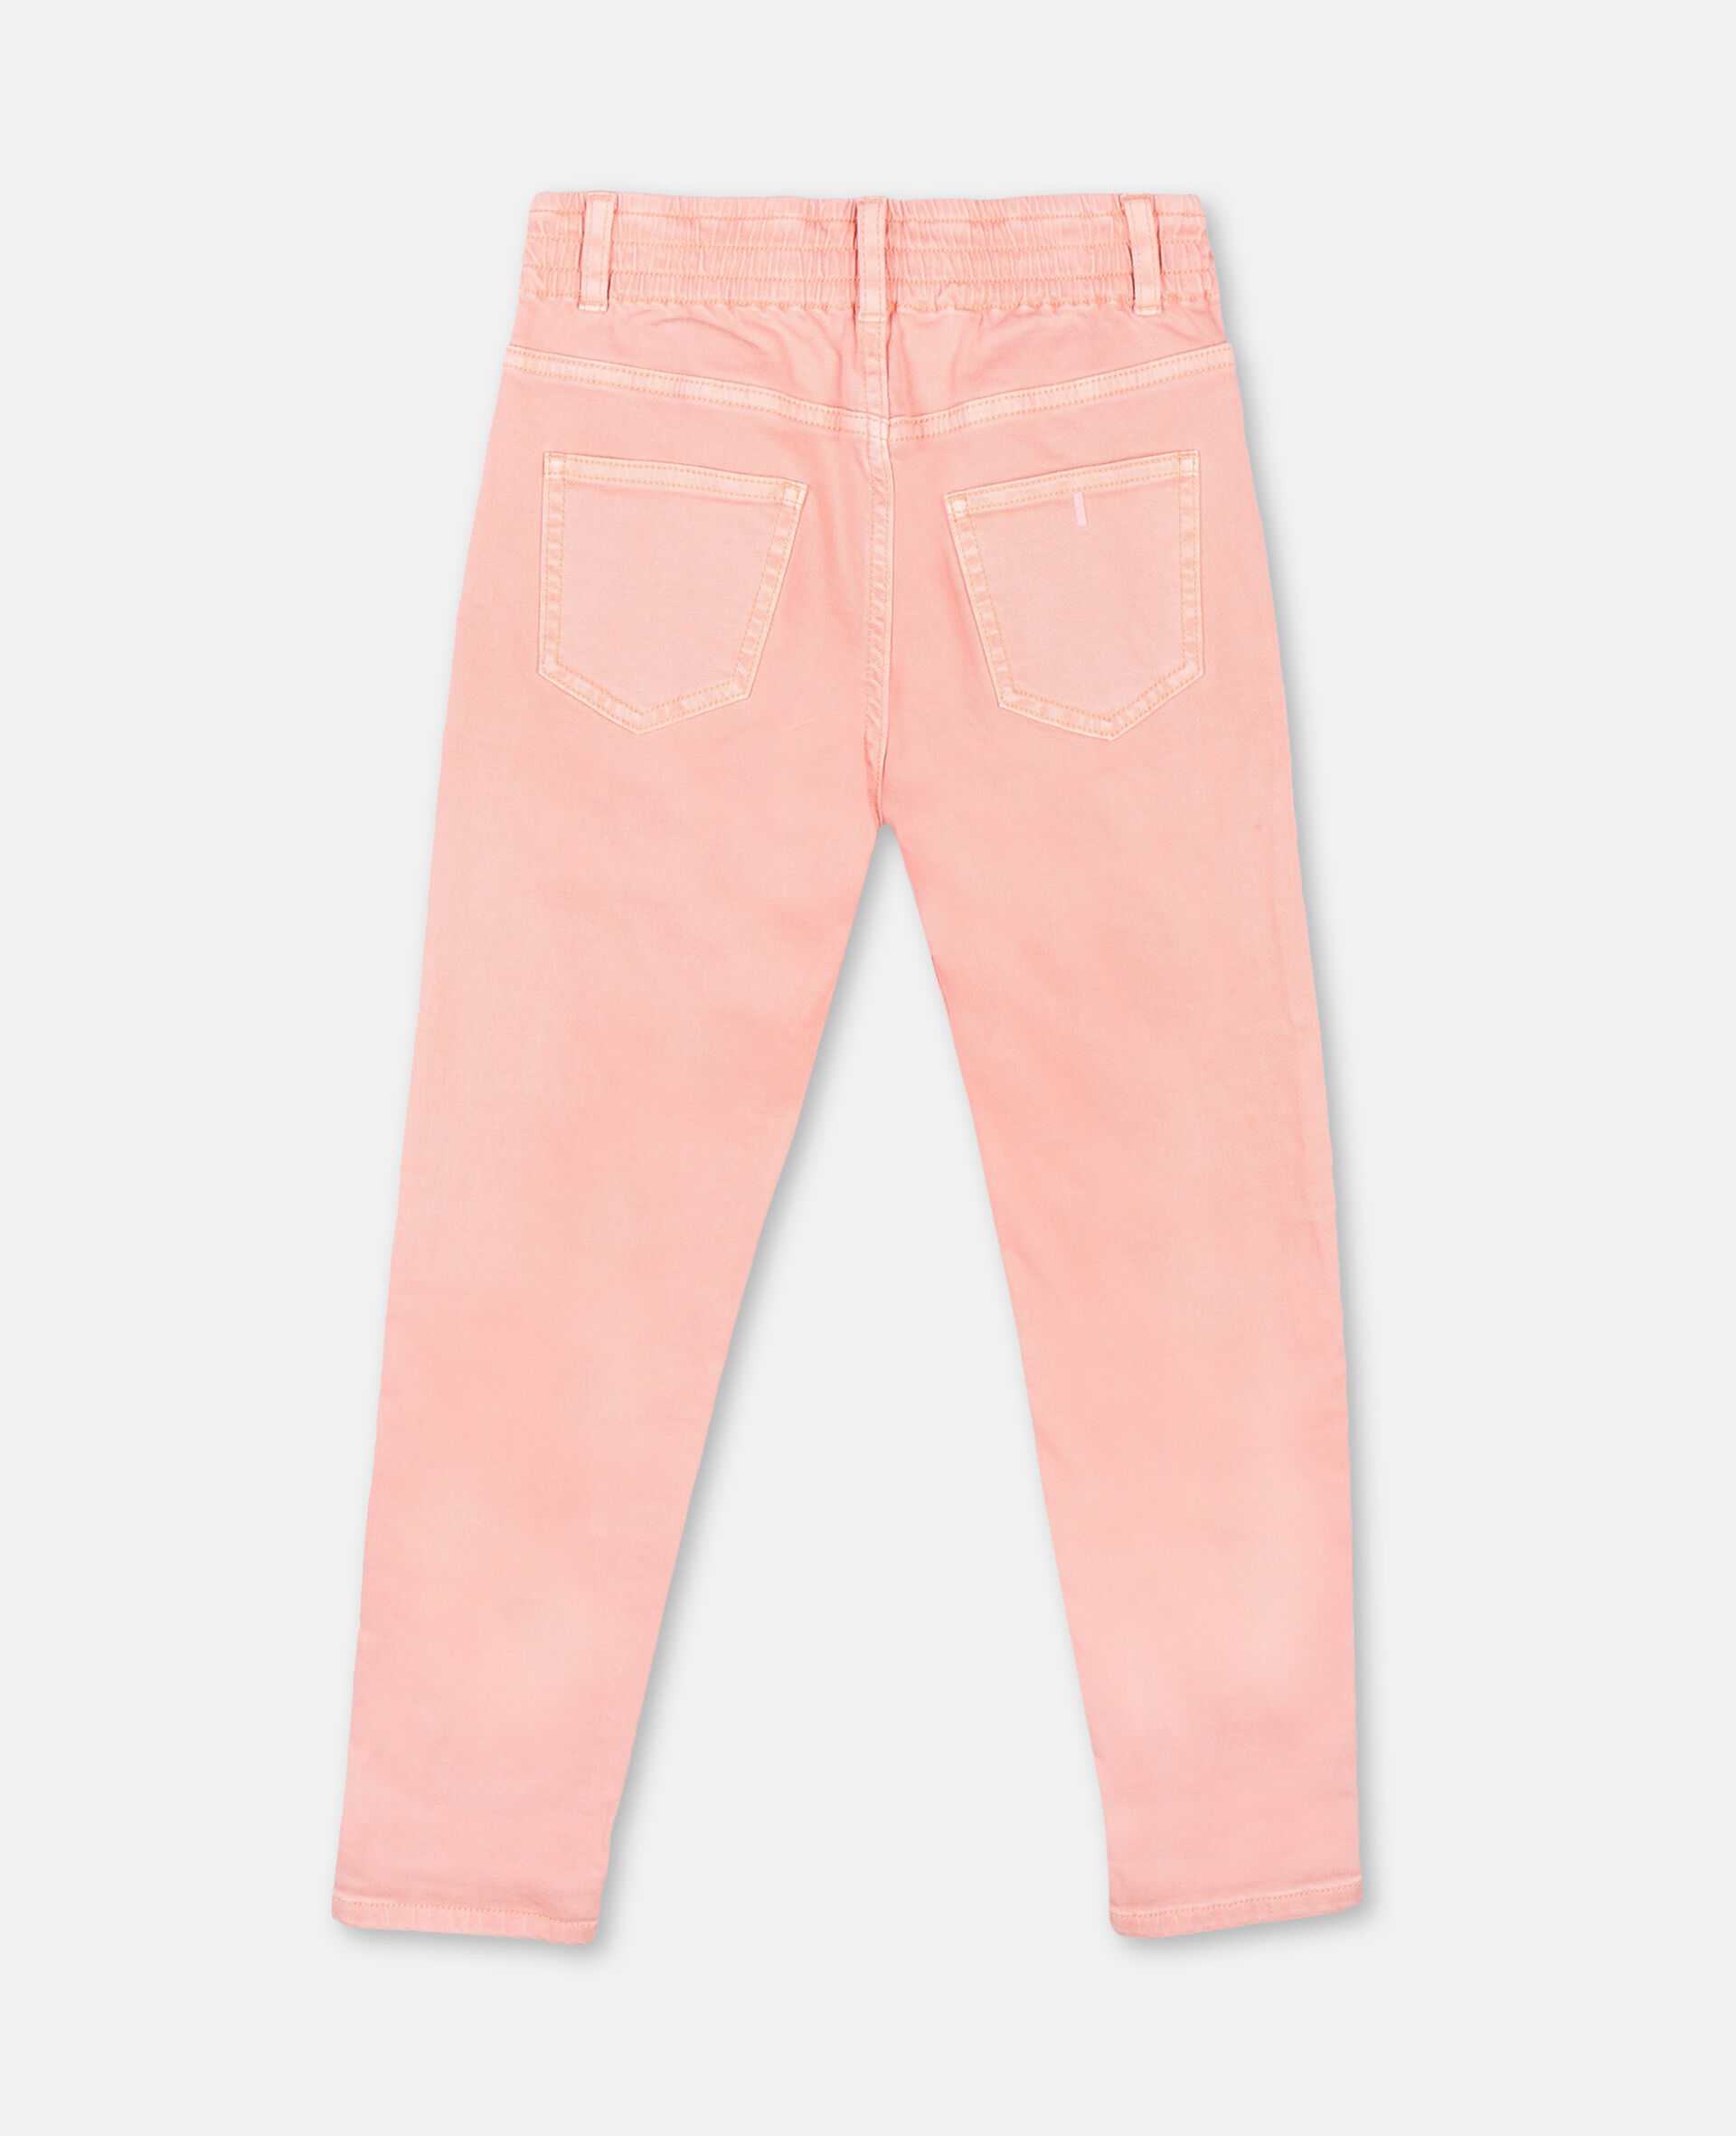 Mom Denim Trousers-Pink-large image number 3